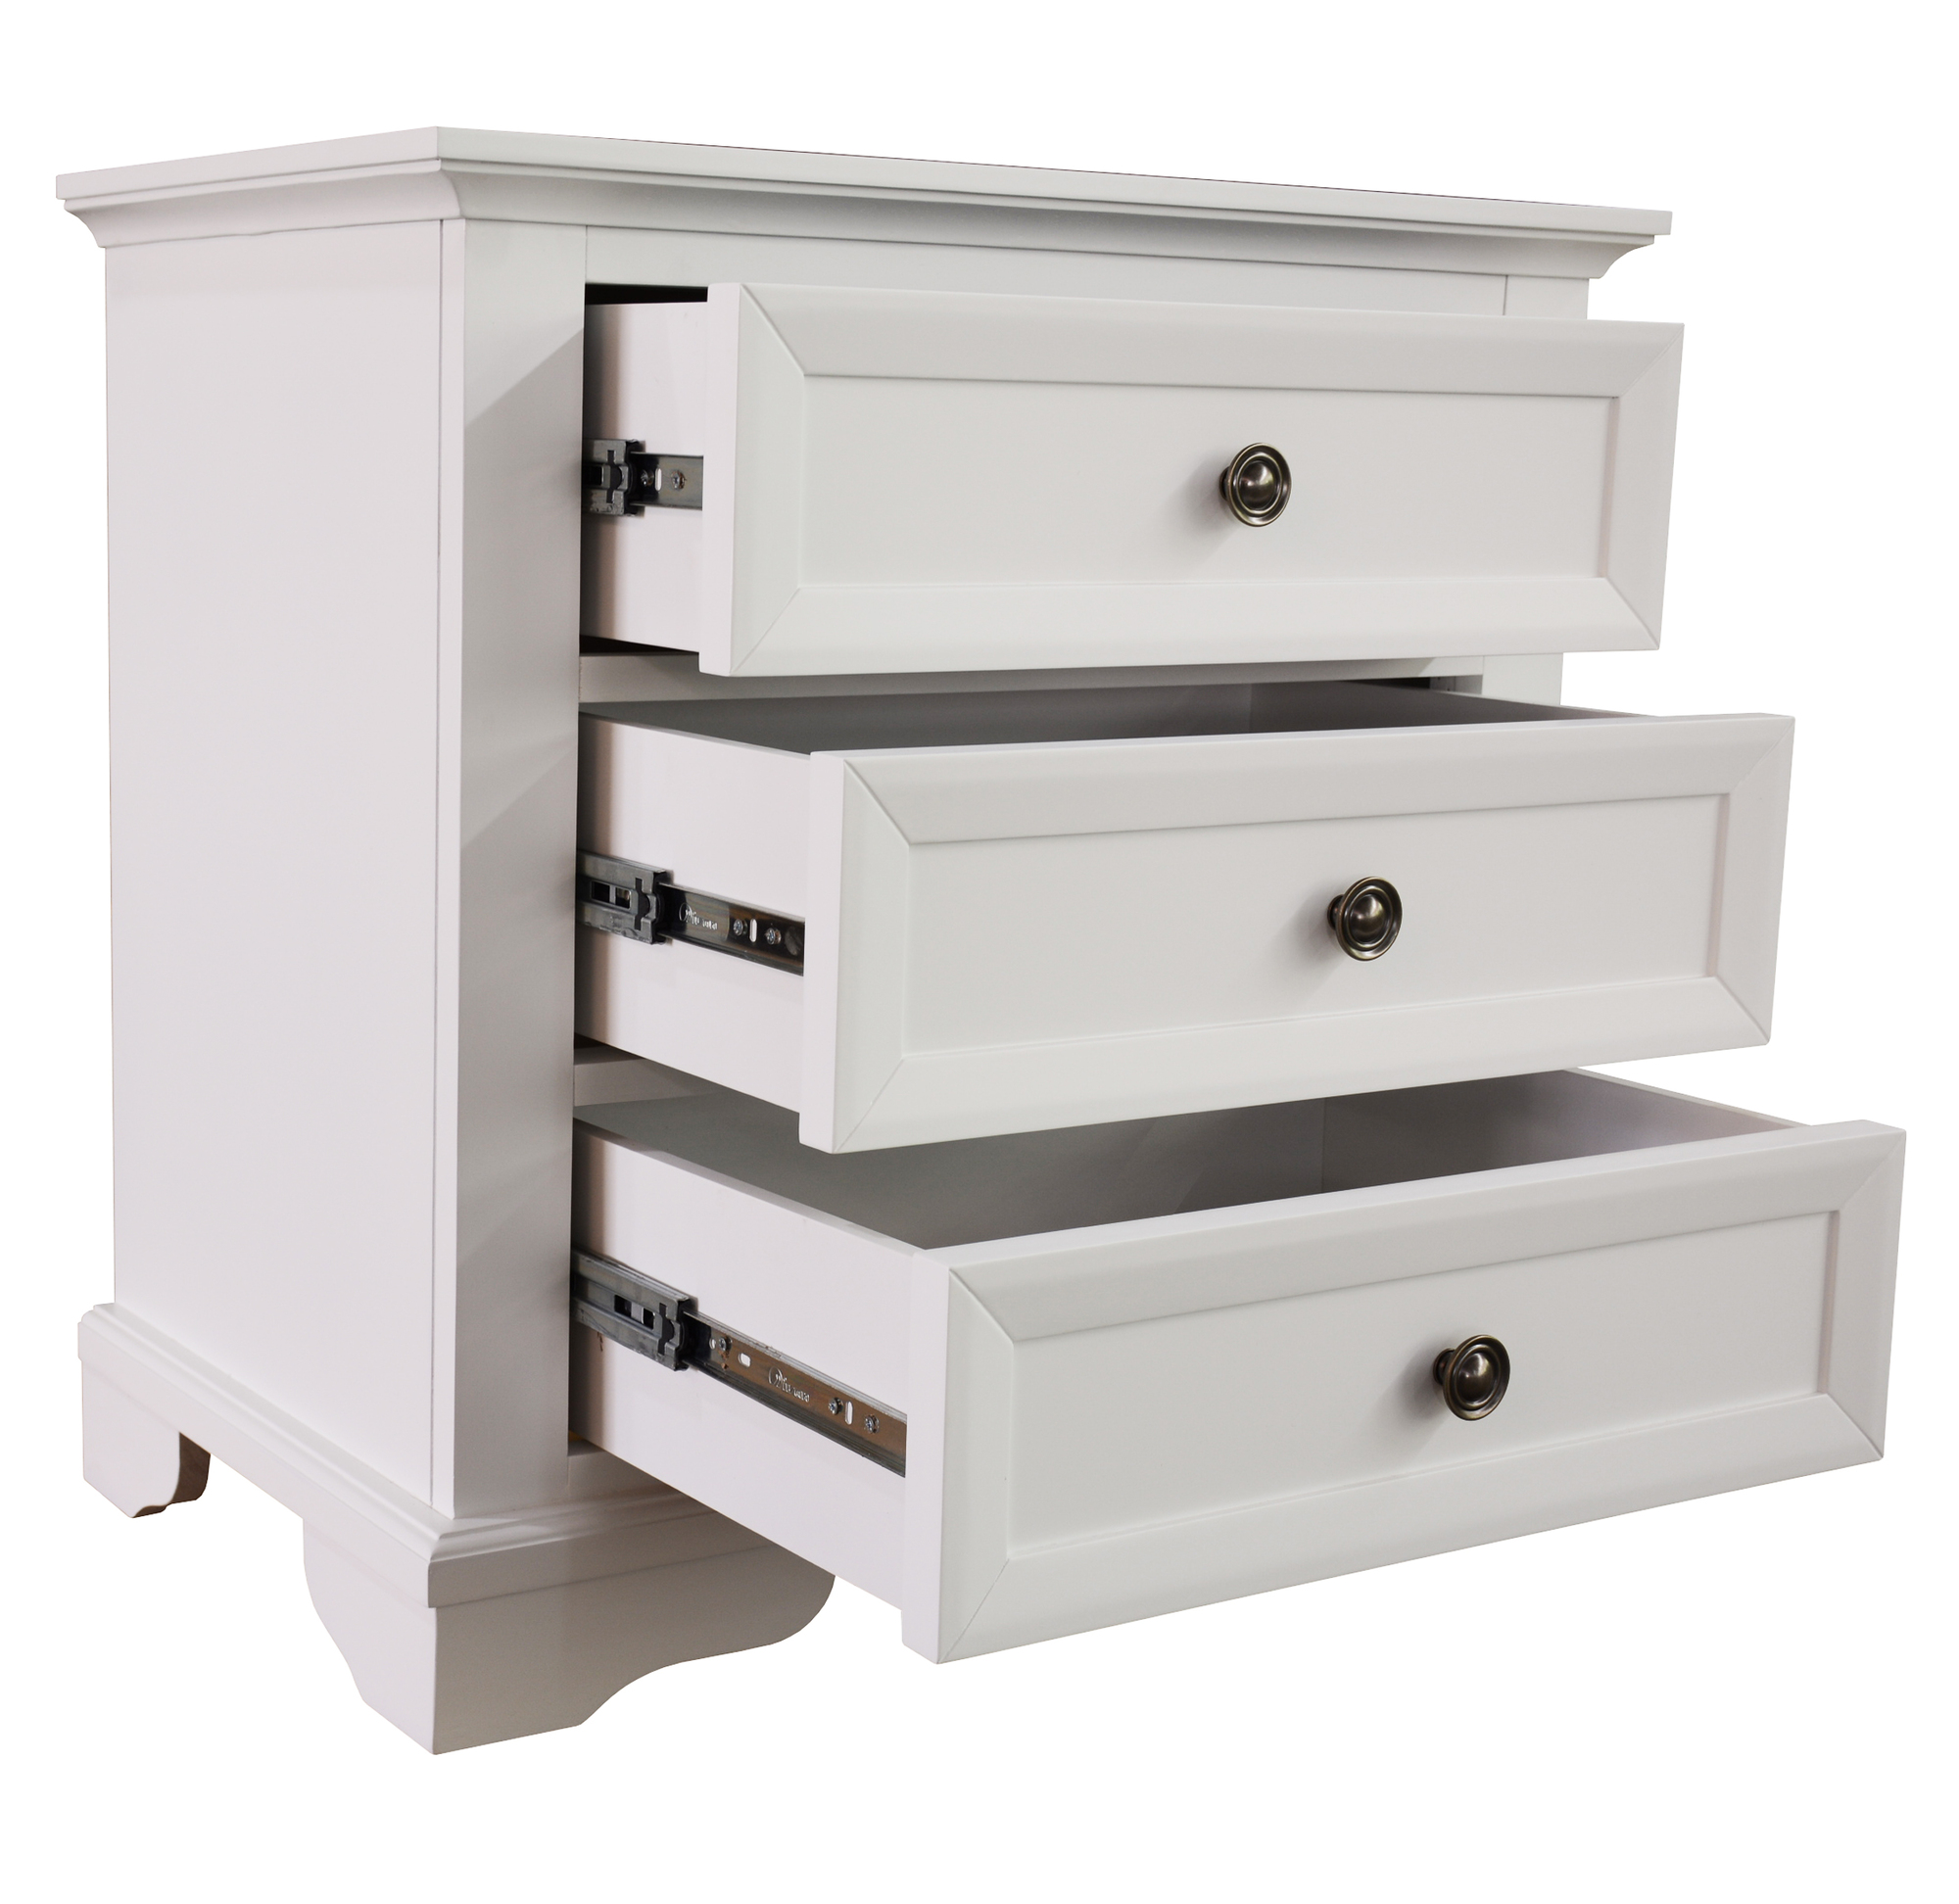 White Bedside Tables With Drawers Australia / White Rattan Bedside